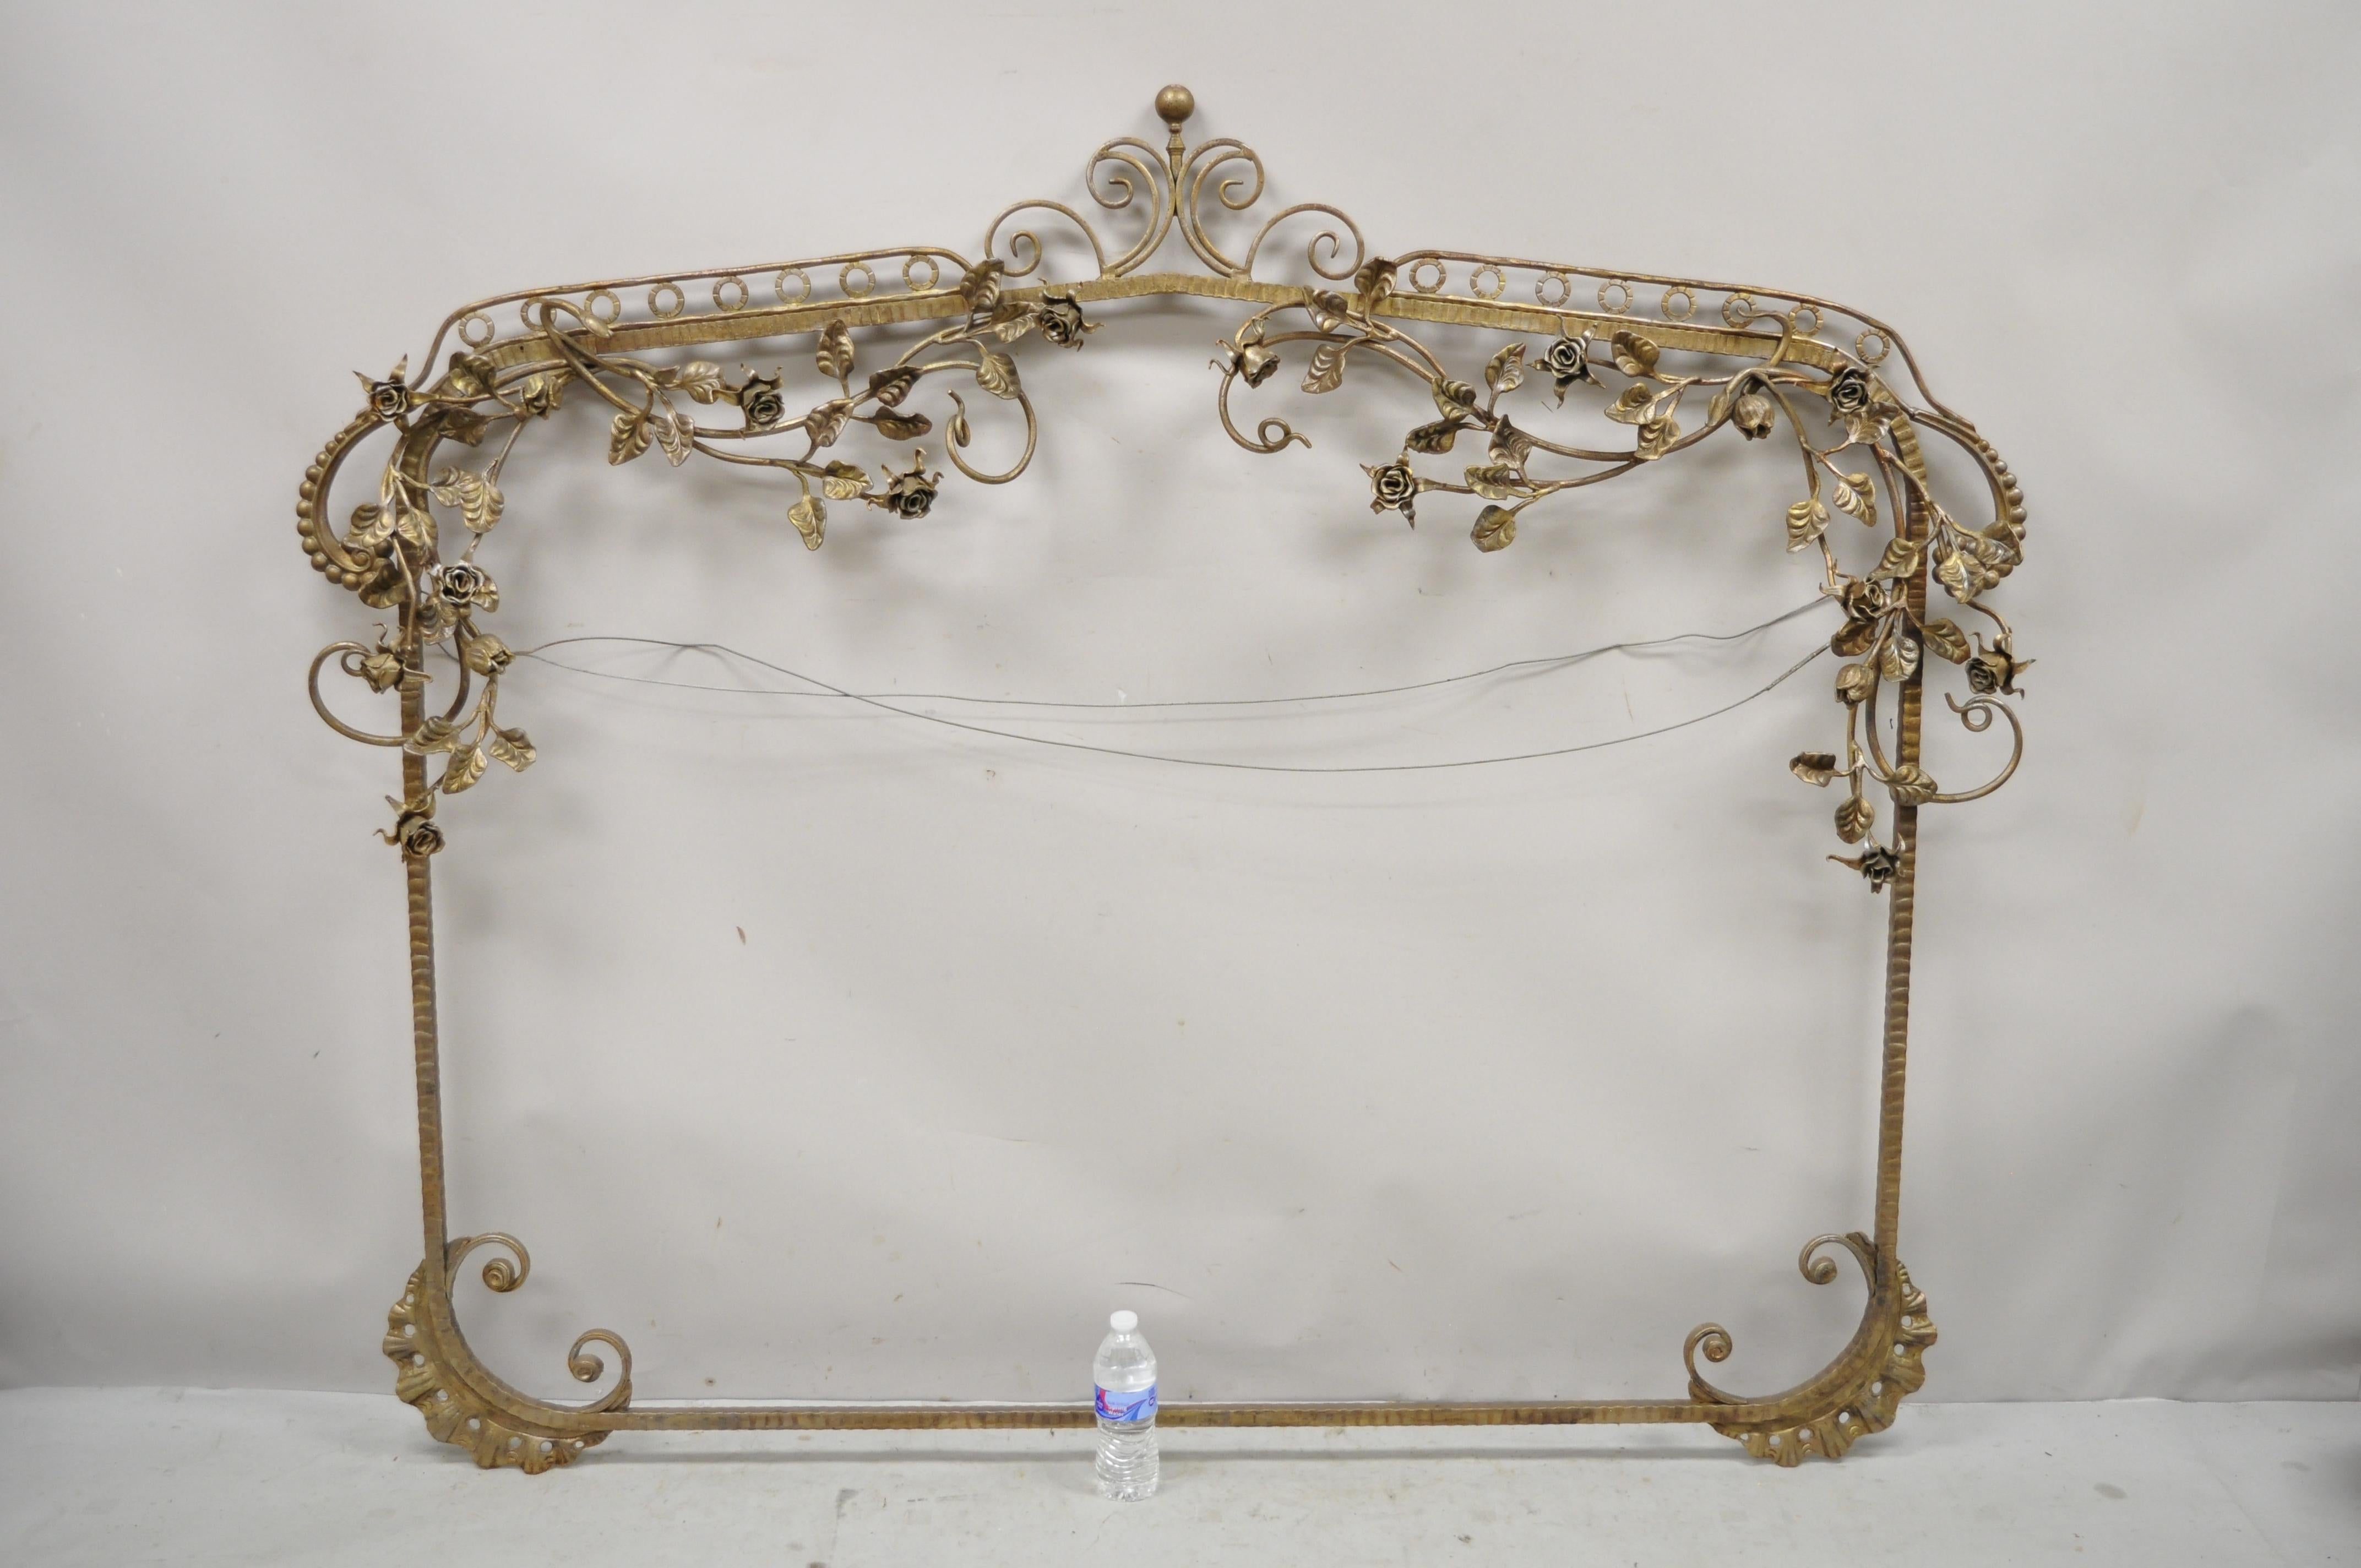 Large Vintage Italian Hollywood Regency wrought iron Shabby flower chic mirror frame. Item features unique floral decorated frame, large impressive size, wrought iron construction, very nice vintage item, quality craftsmanship, great style and form.